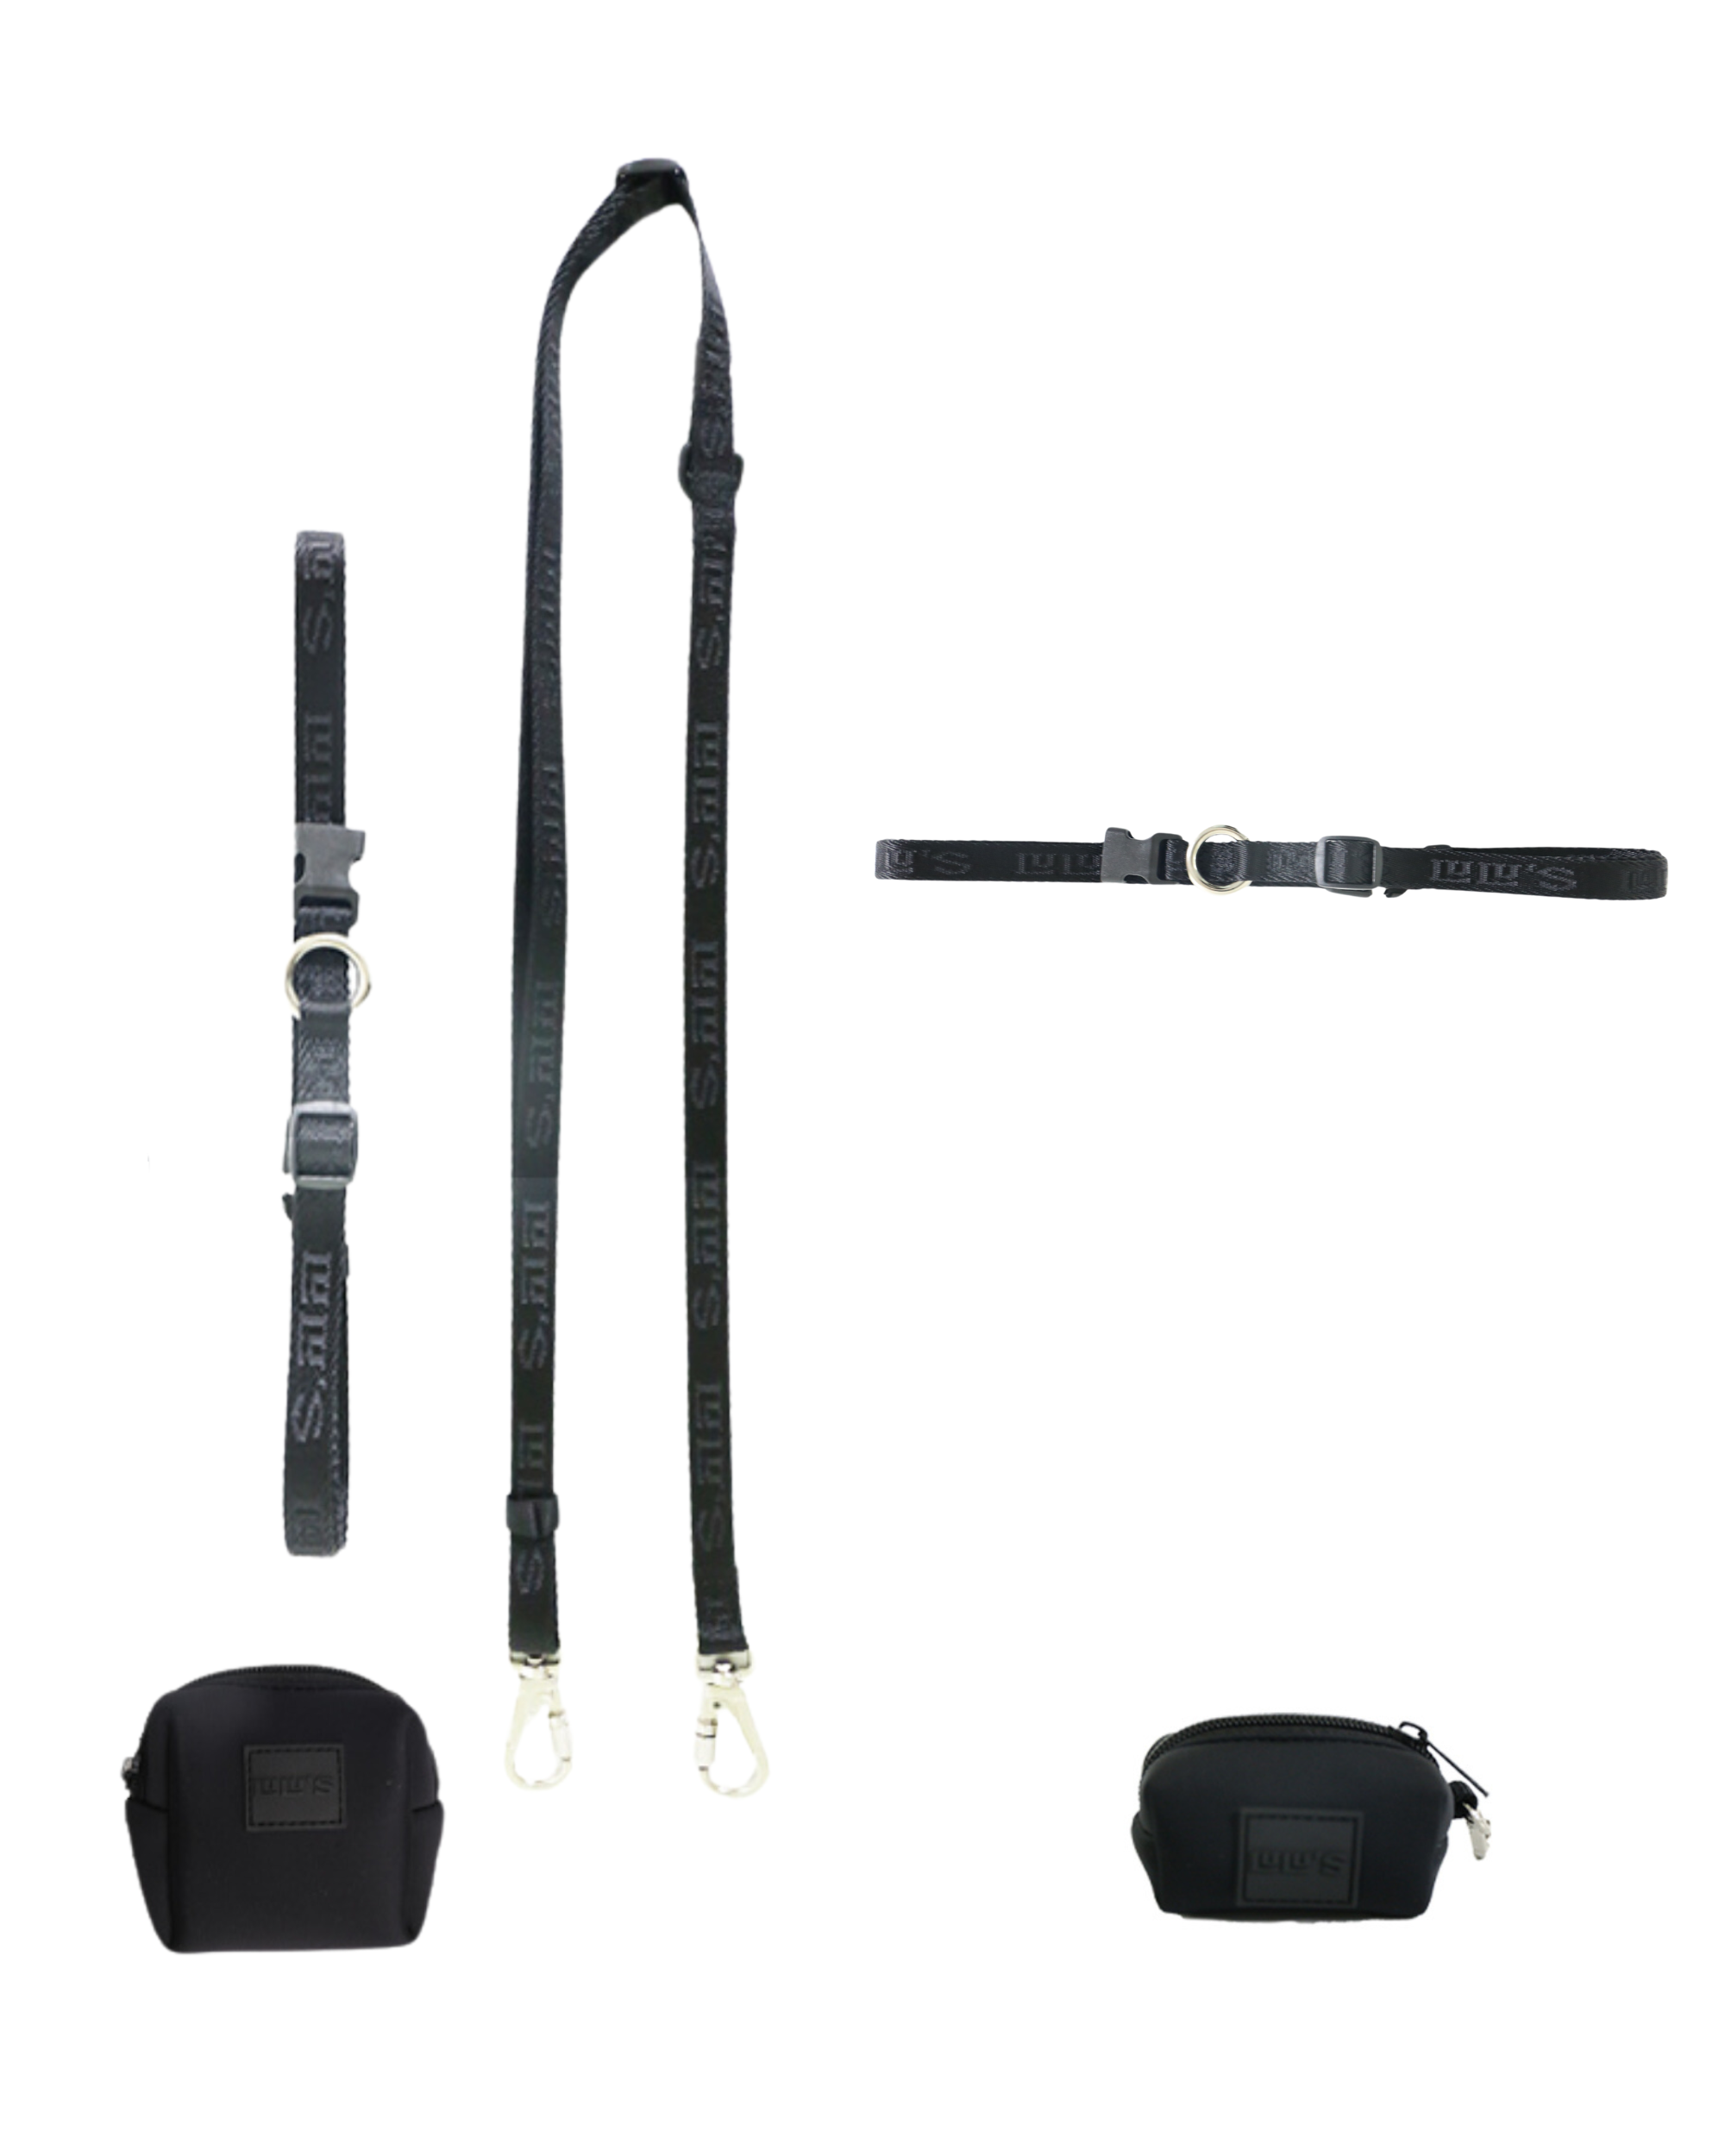 A complete Midnight black Lulu's dog walking set, including an adjustable leash with metal clips, an adjustable waist belt, a dog collar, a larger pouch, and a smaller poop bag holder, all featuring the brand's logo and a durable design, laid out flat.